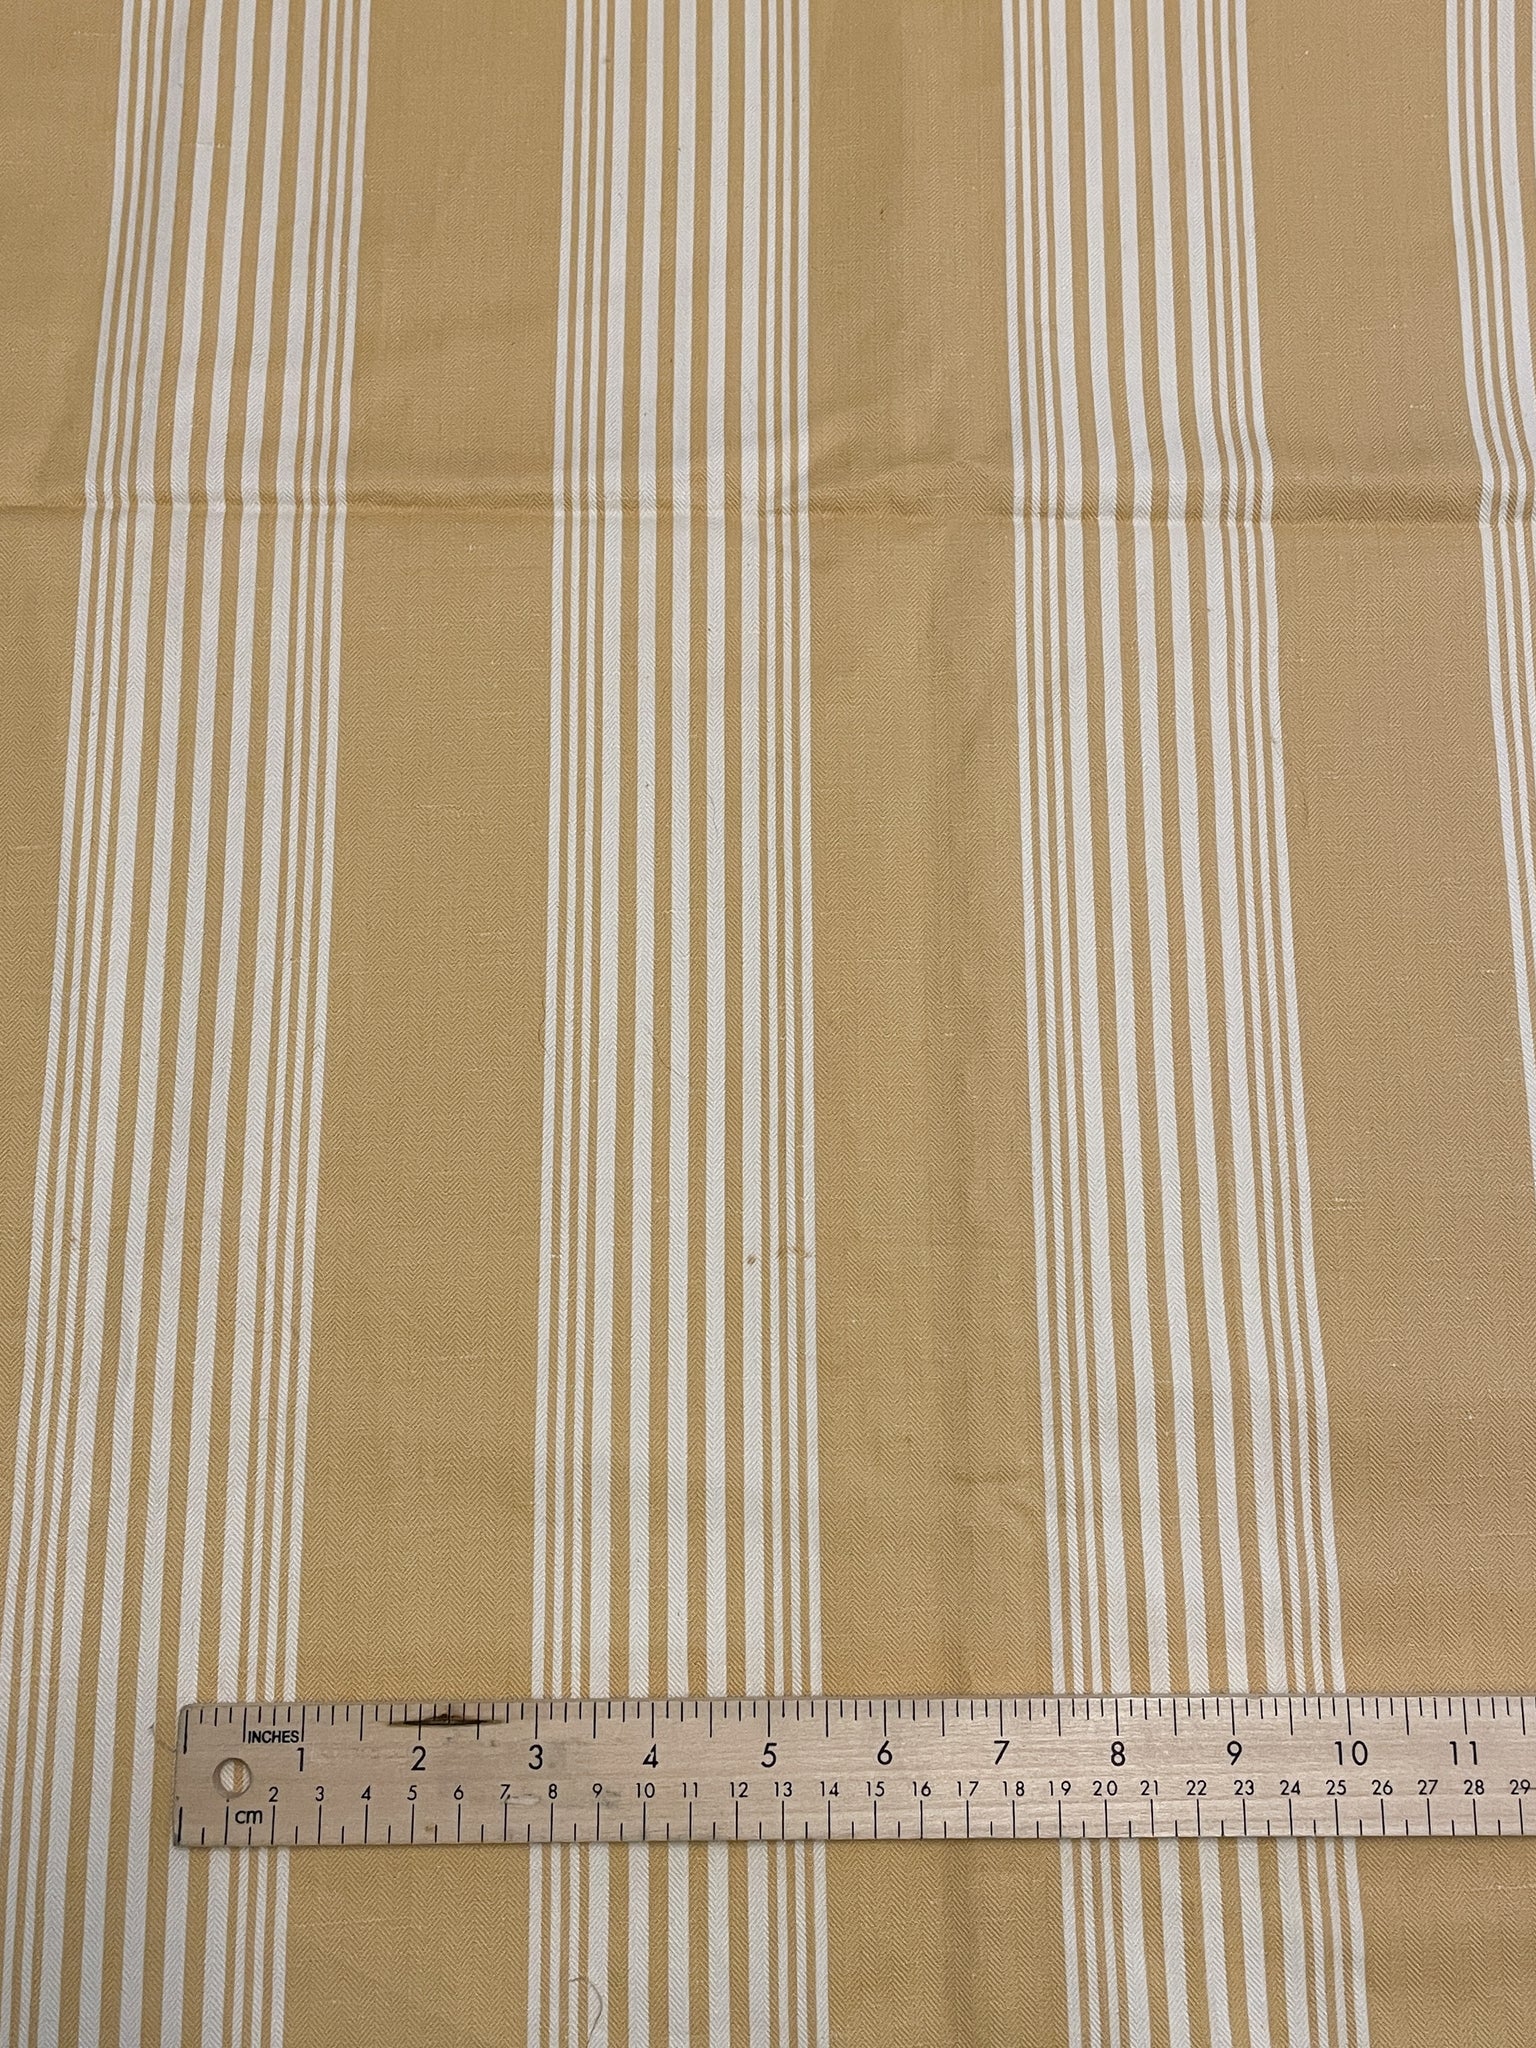 7/8 Cotton Herringbone with Yarn Dyed Stripe Remnant - Yellow and Off White (Natural)